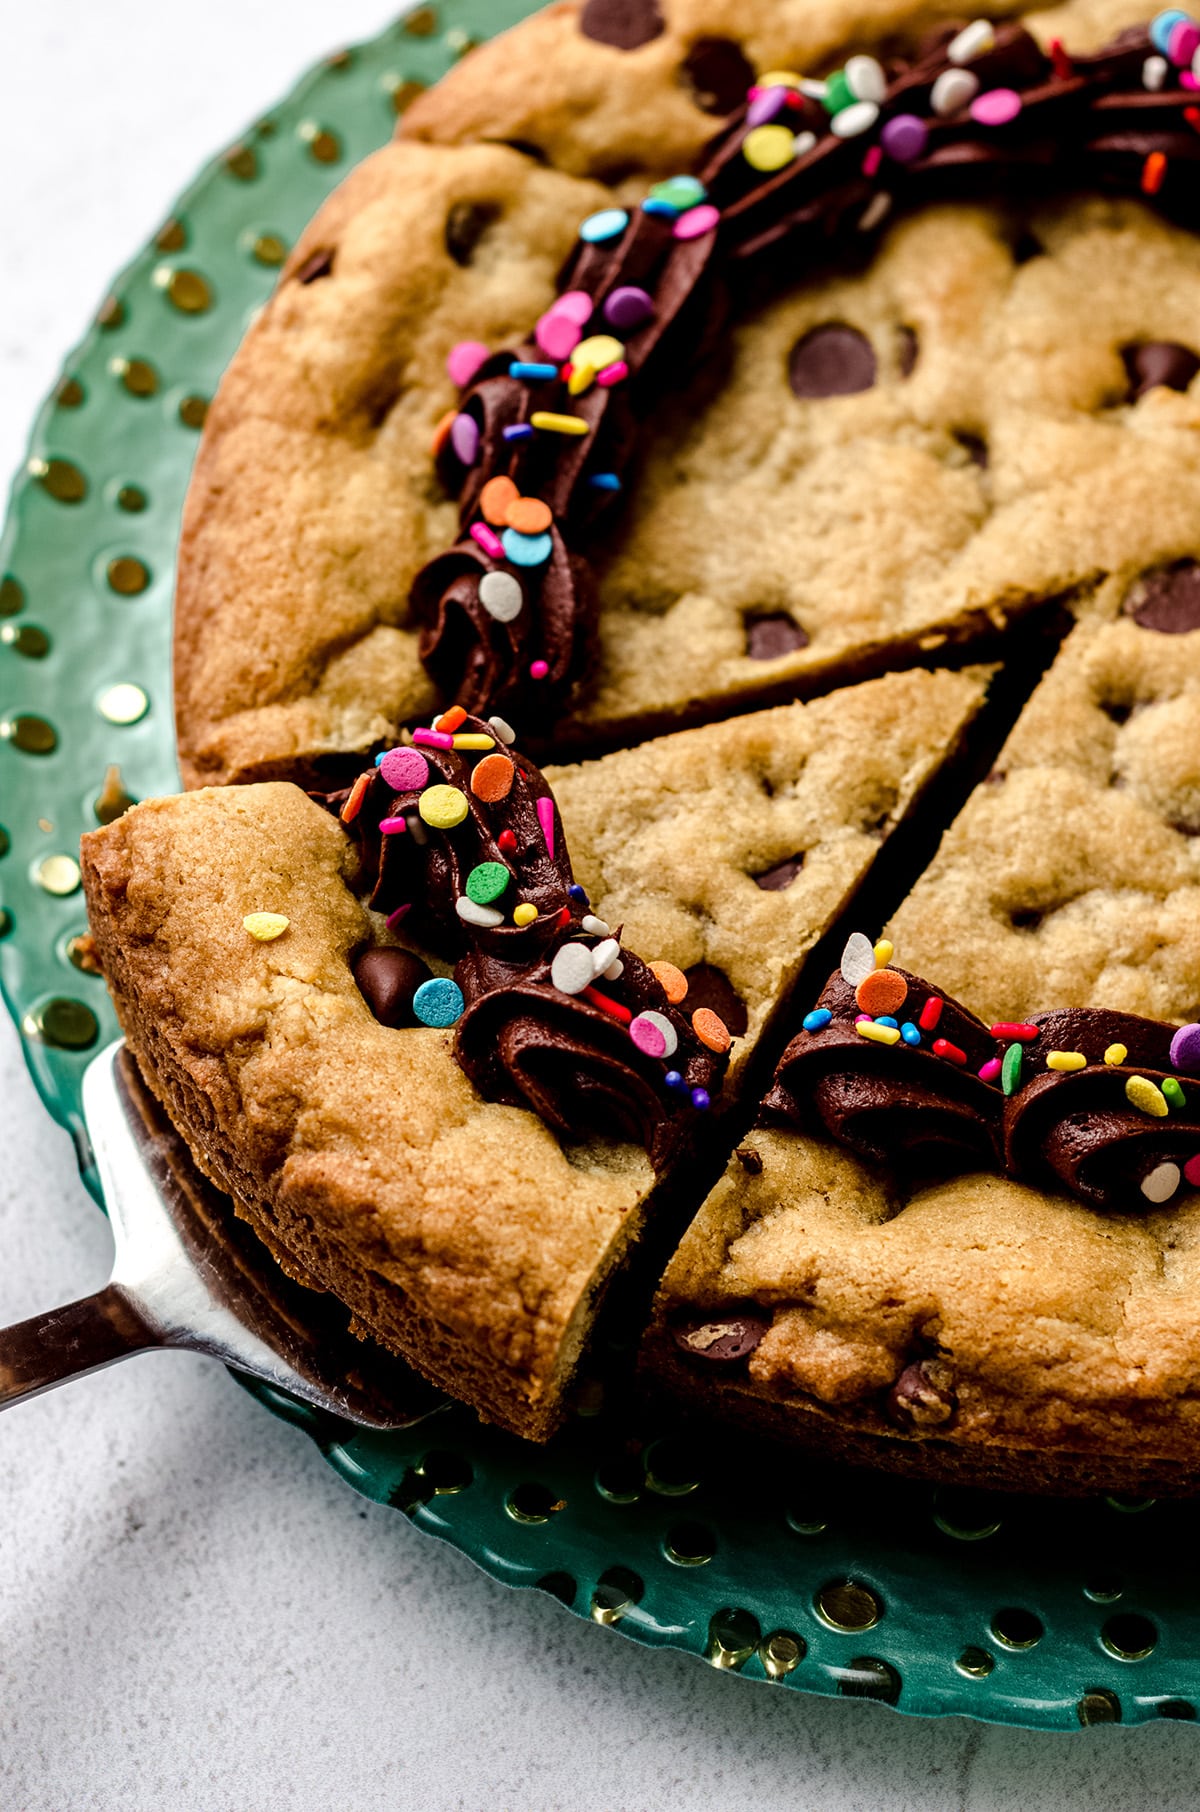 Chocolate Chip Cookie Cake with Chocolate Fudge Frosting